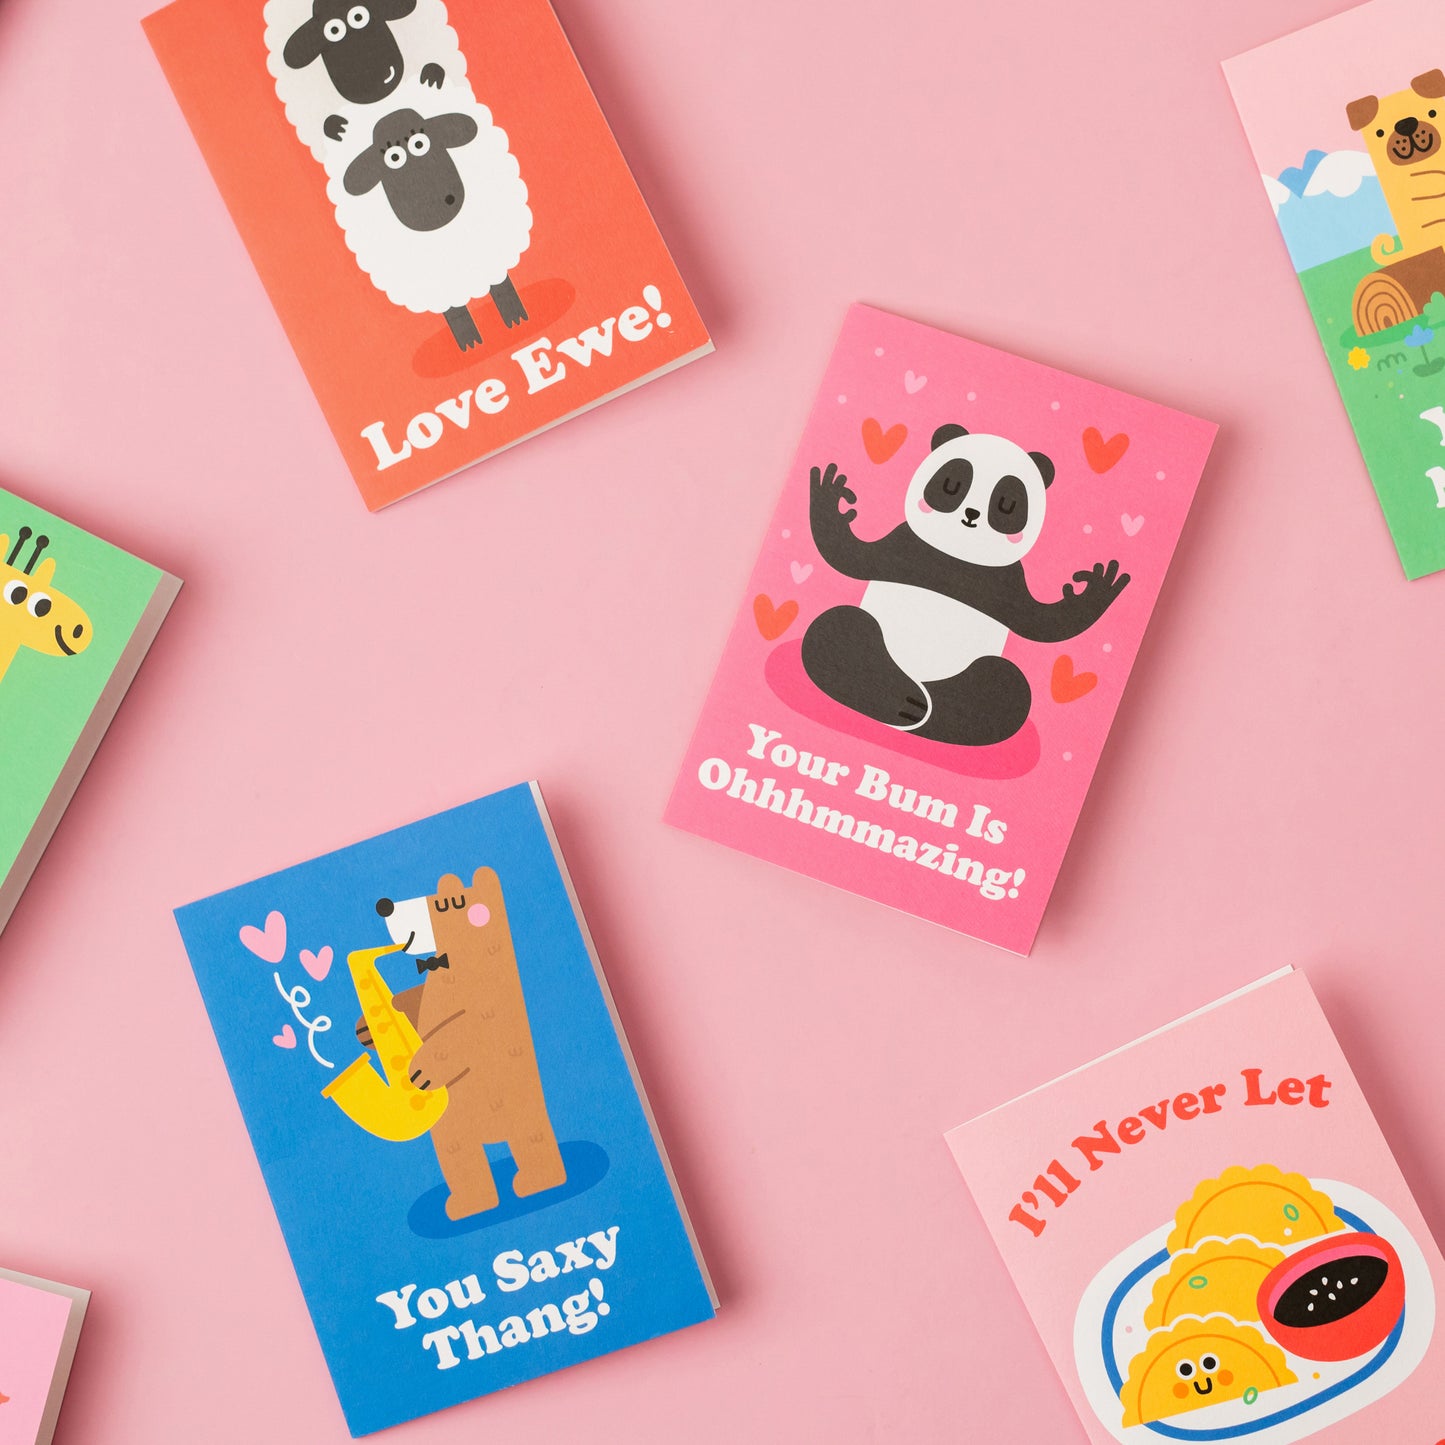 Valentine's day cards with cute animals on a pink background.